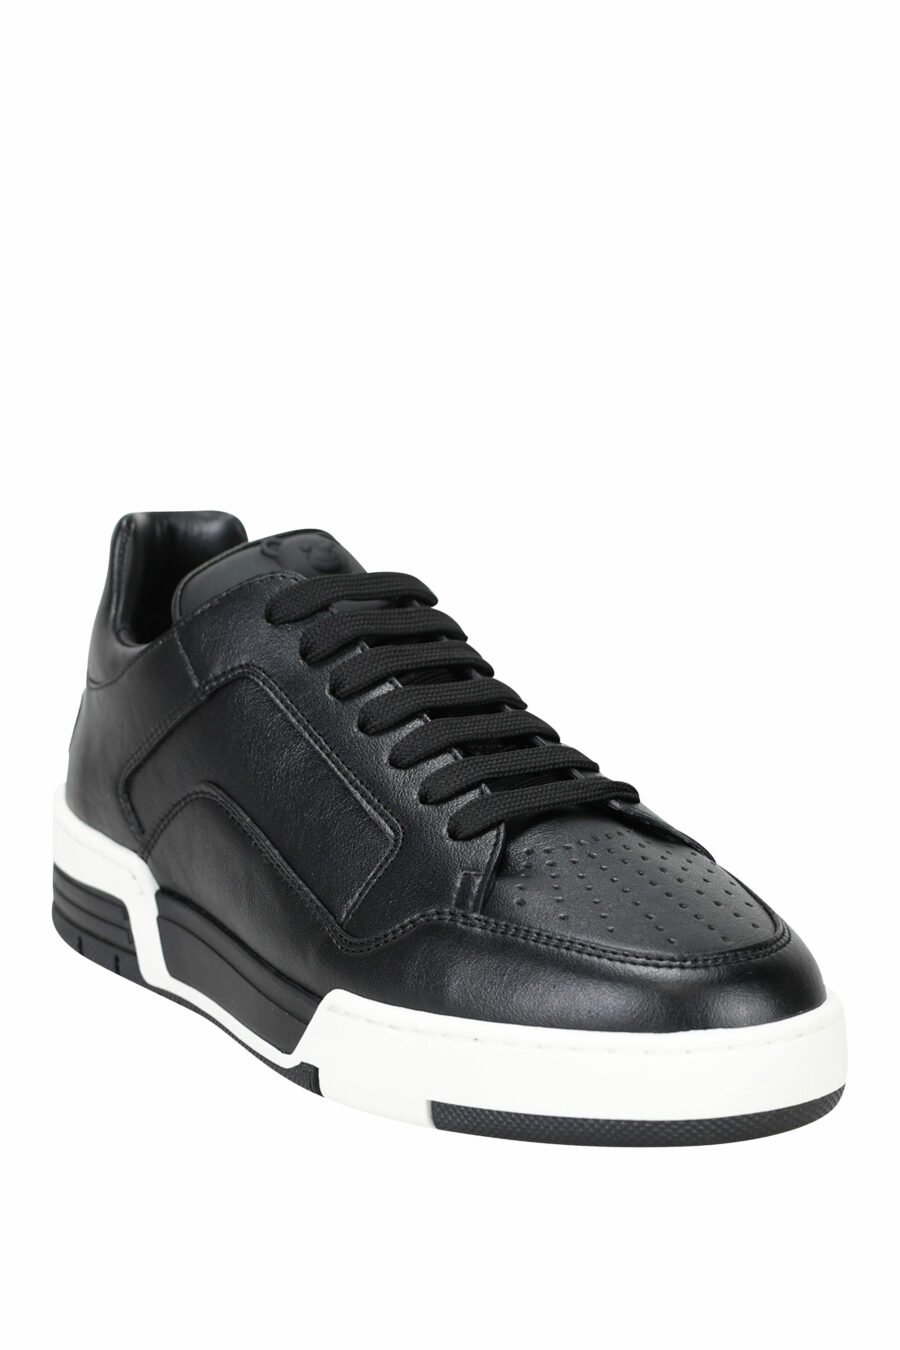 Black leather trainers with white sole and logo - 8054653096394 1